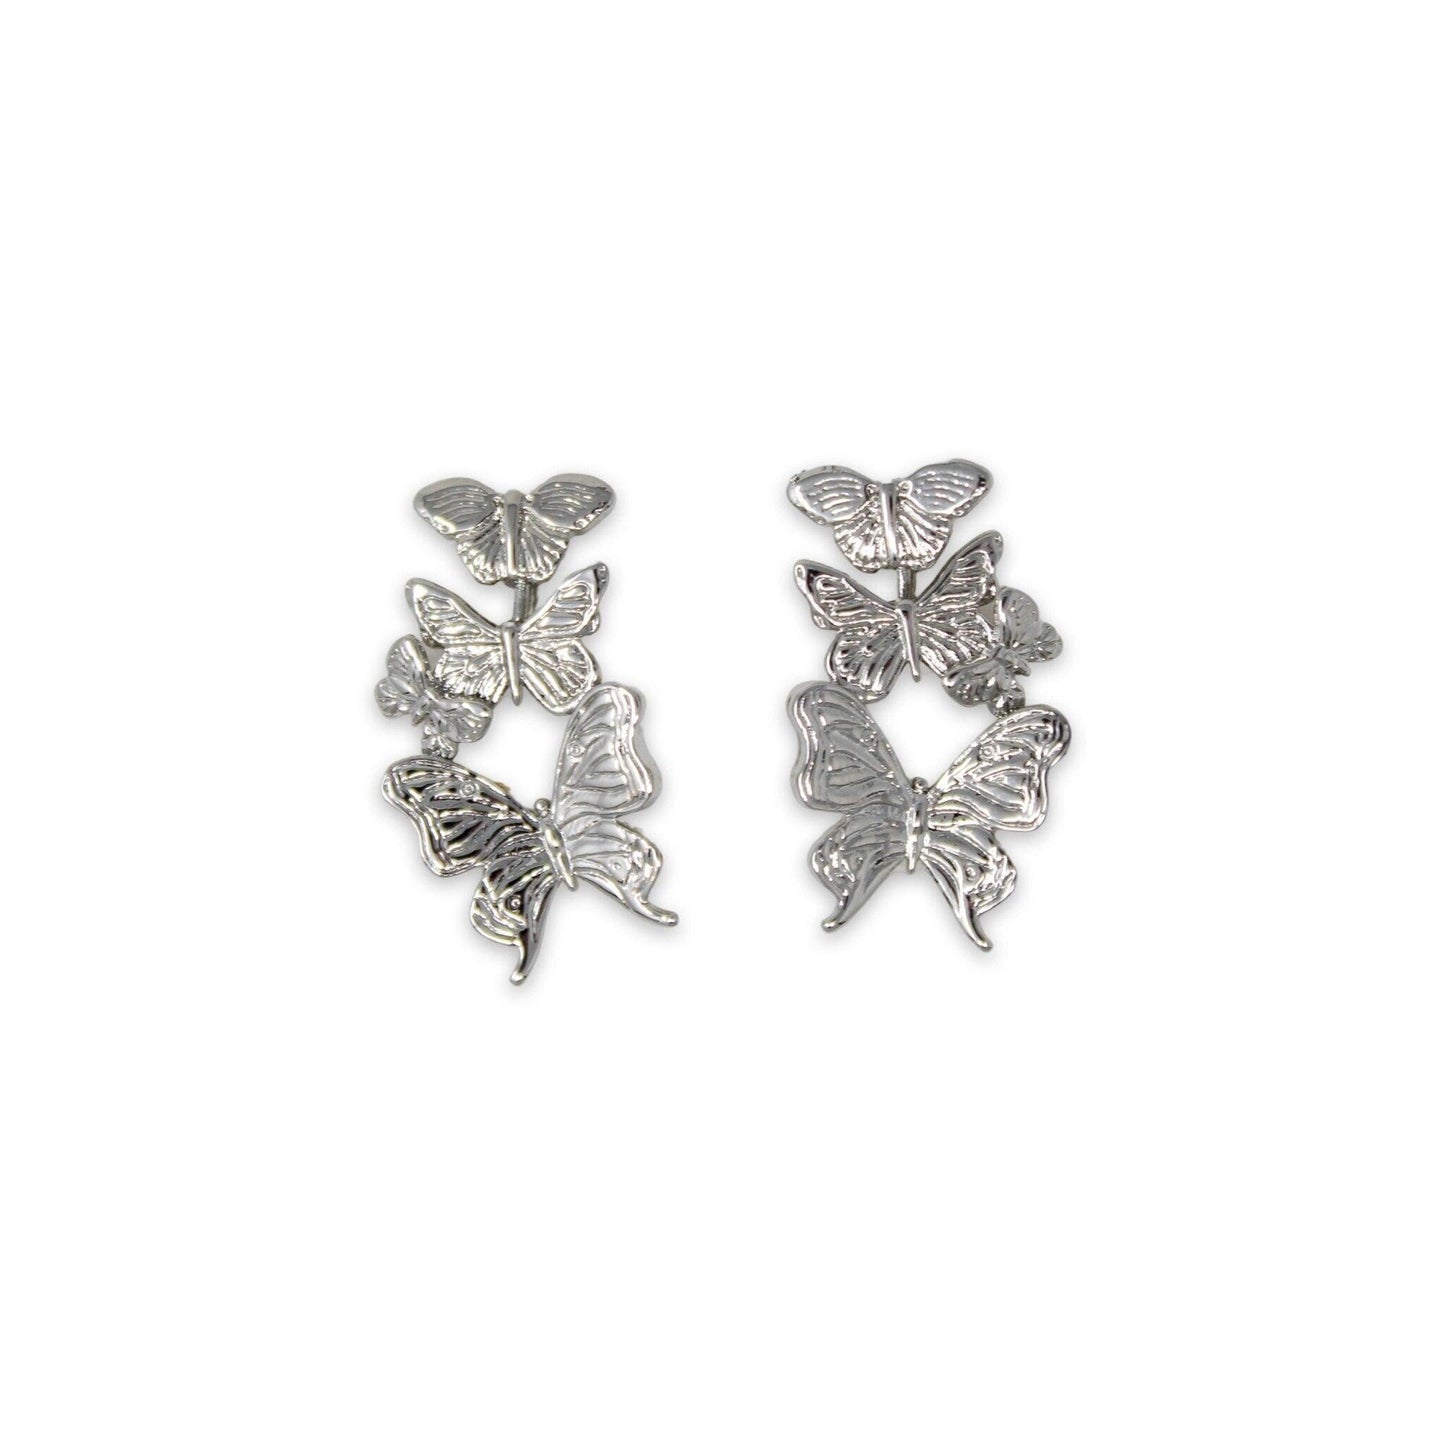 Unique Earrings "Butterfly Breeze" - White Rhodium Gift, Gift For Mom, Artistic, Jewelry